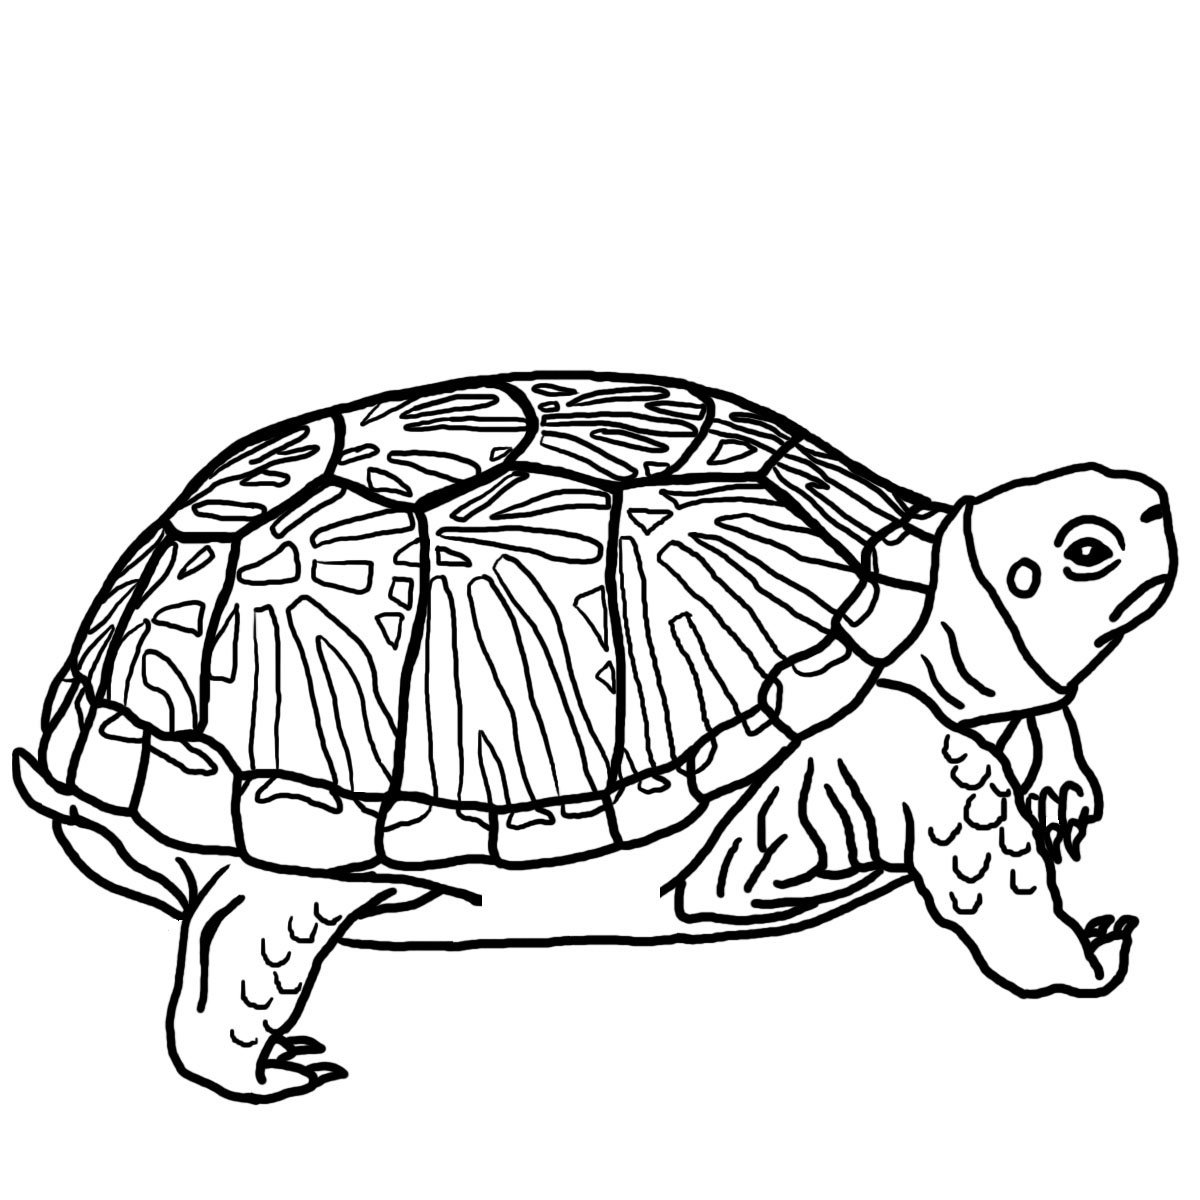 Black And White Drawing Of A Sea Turtle To Print, Free - ClipArt Best